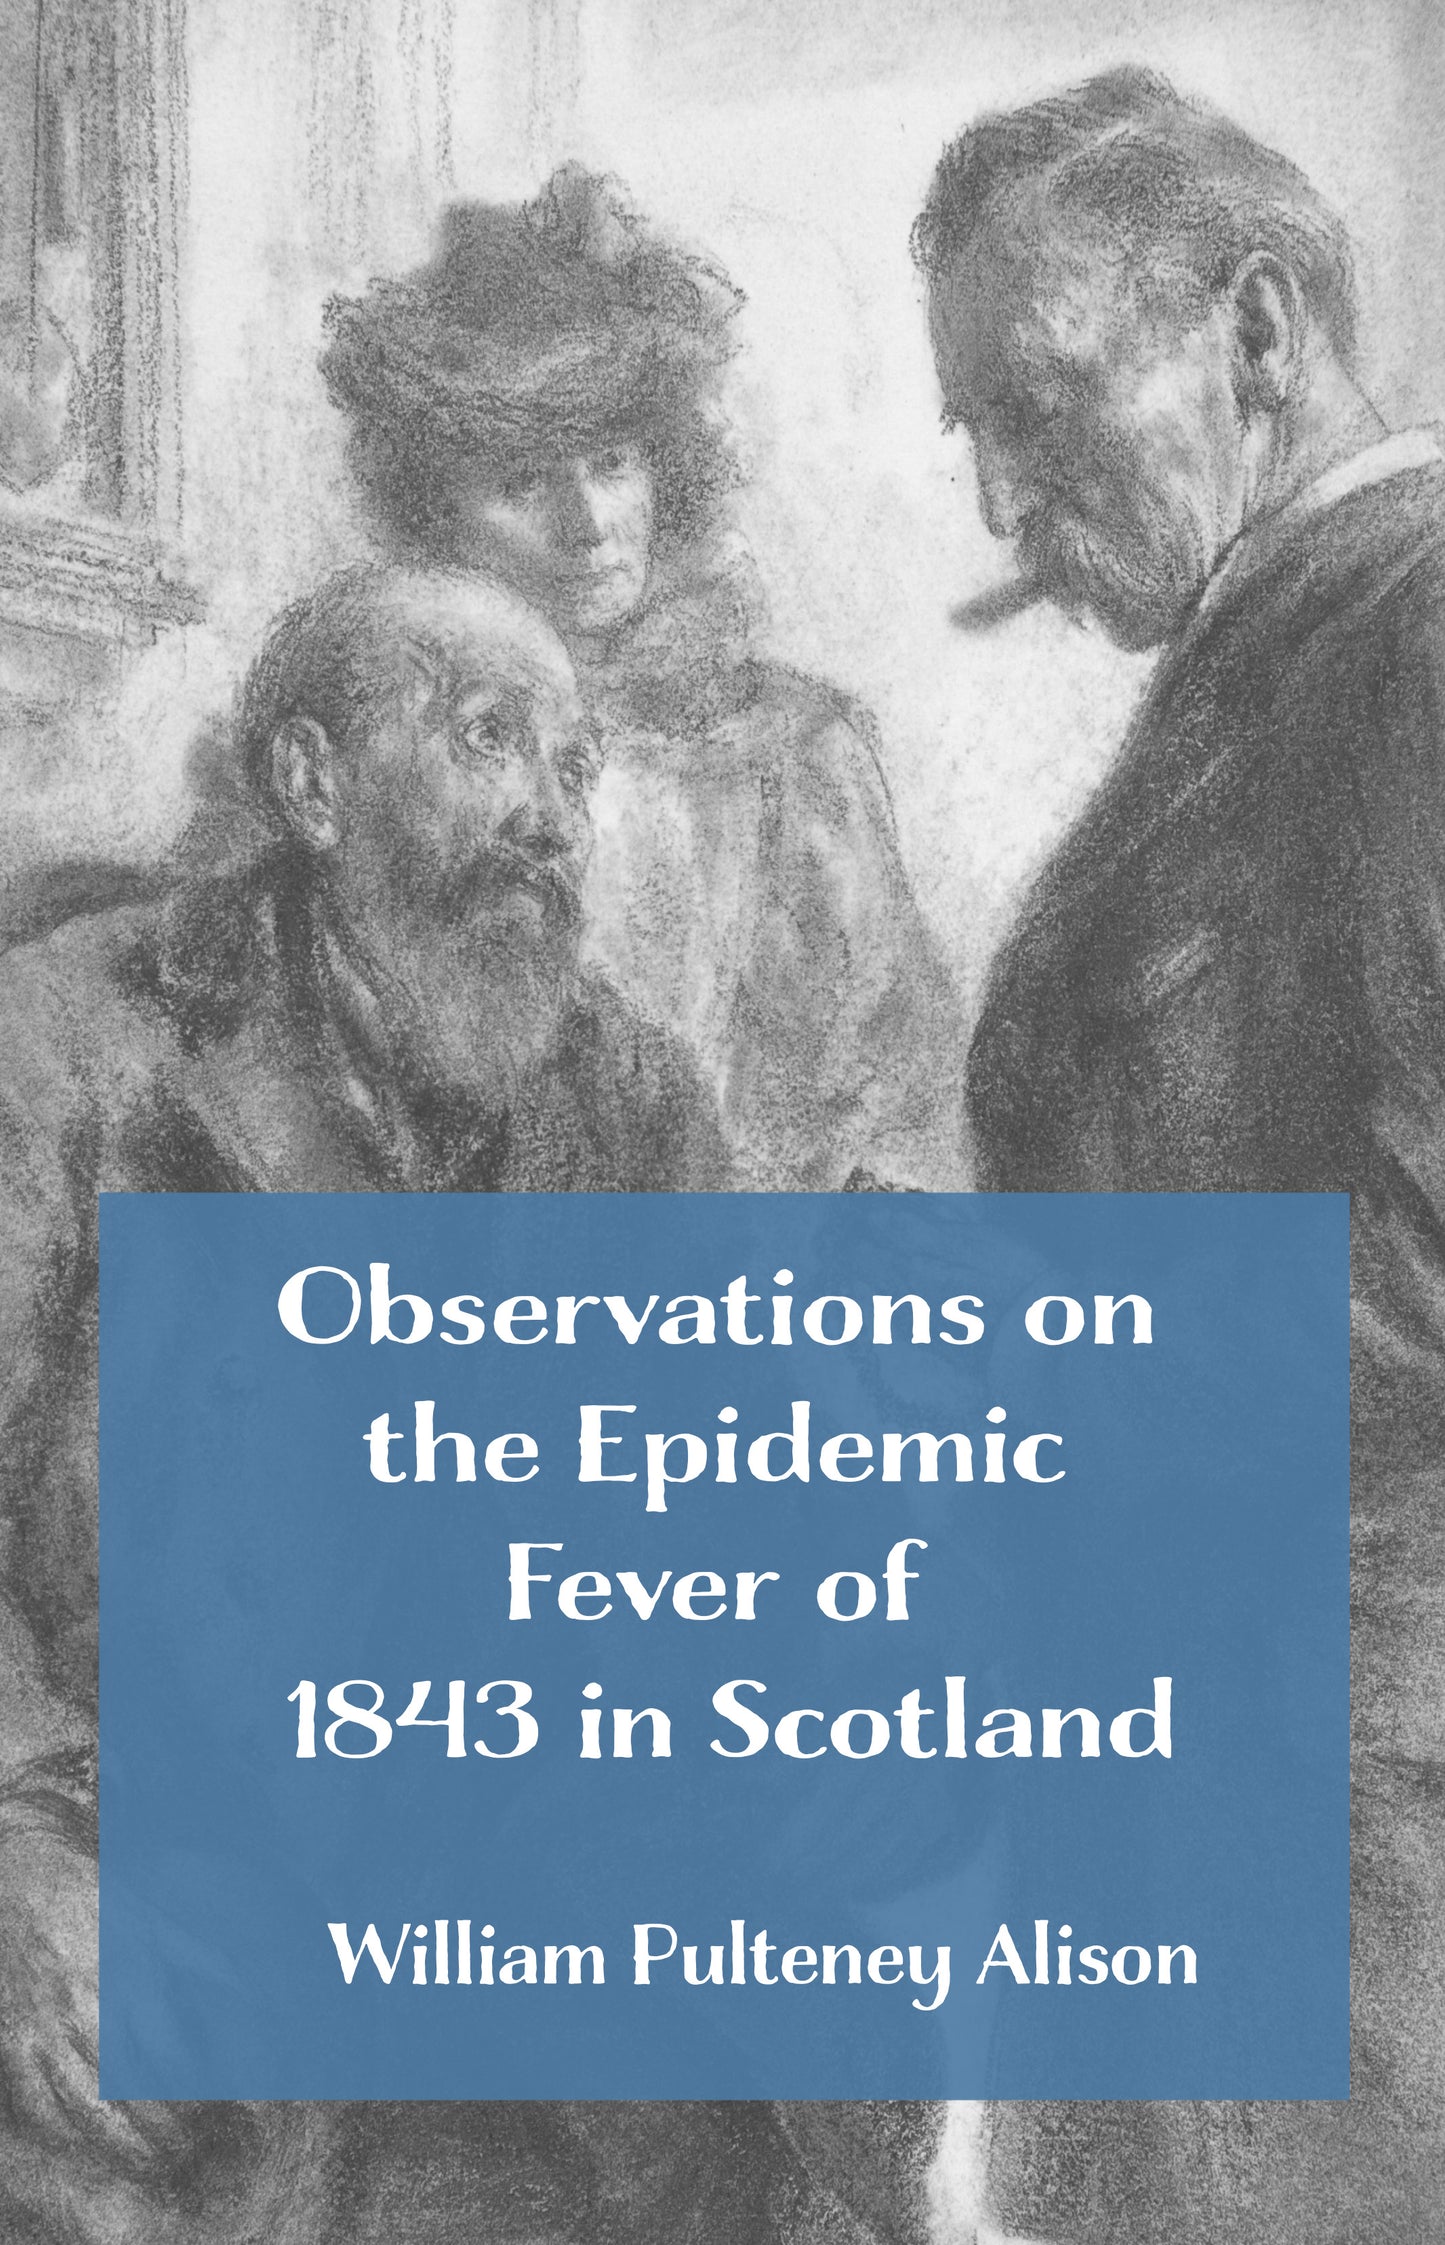 Observations on the Epidemic Fever of 1843 in Scotland